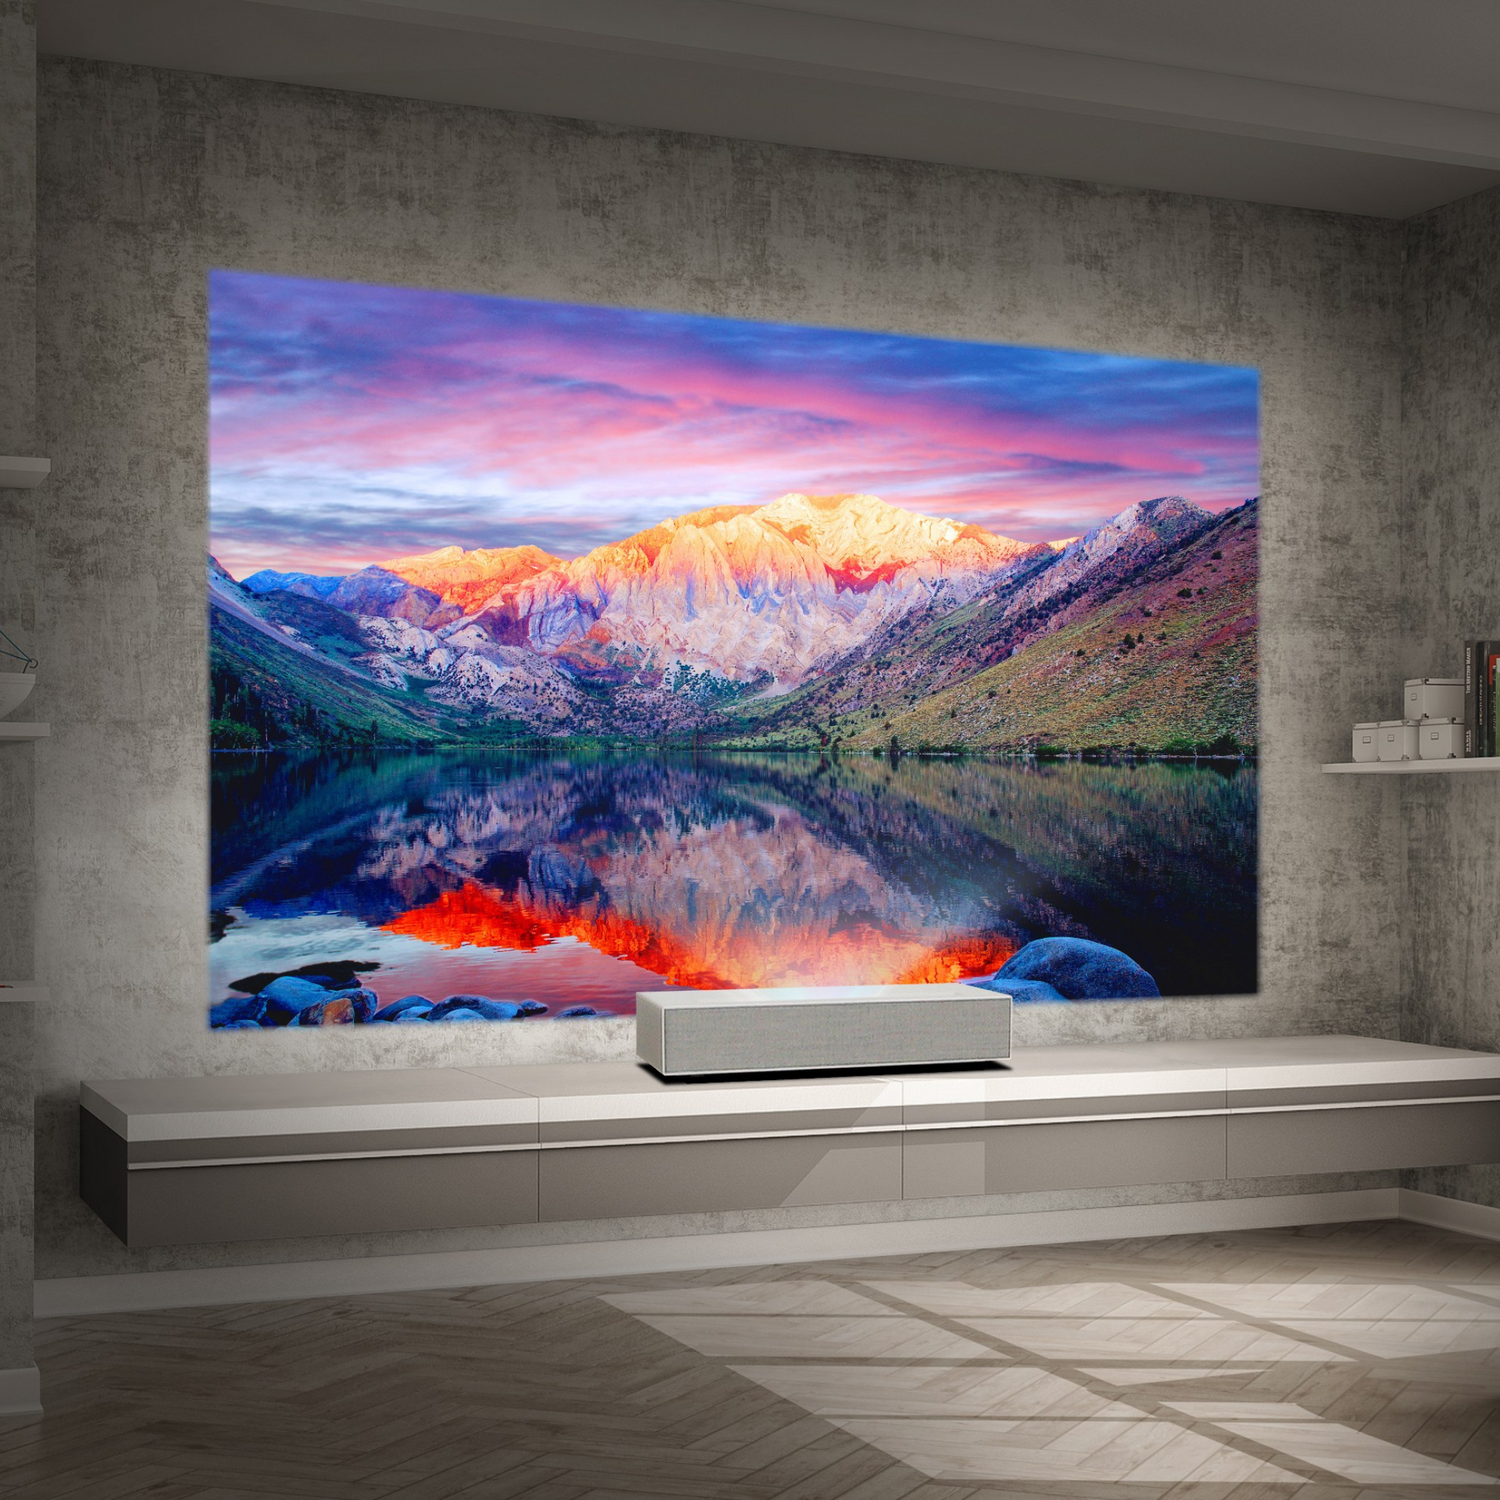 LG Cinebeam Projector Buying Guide